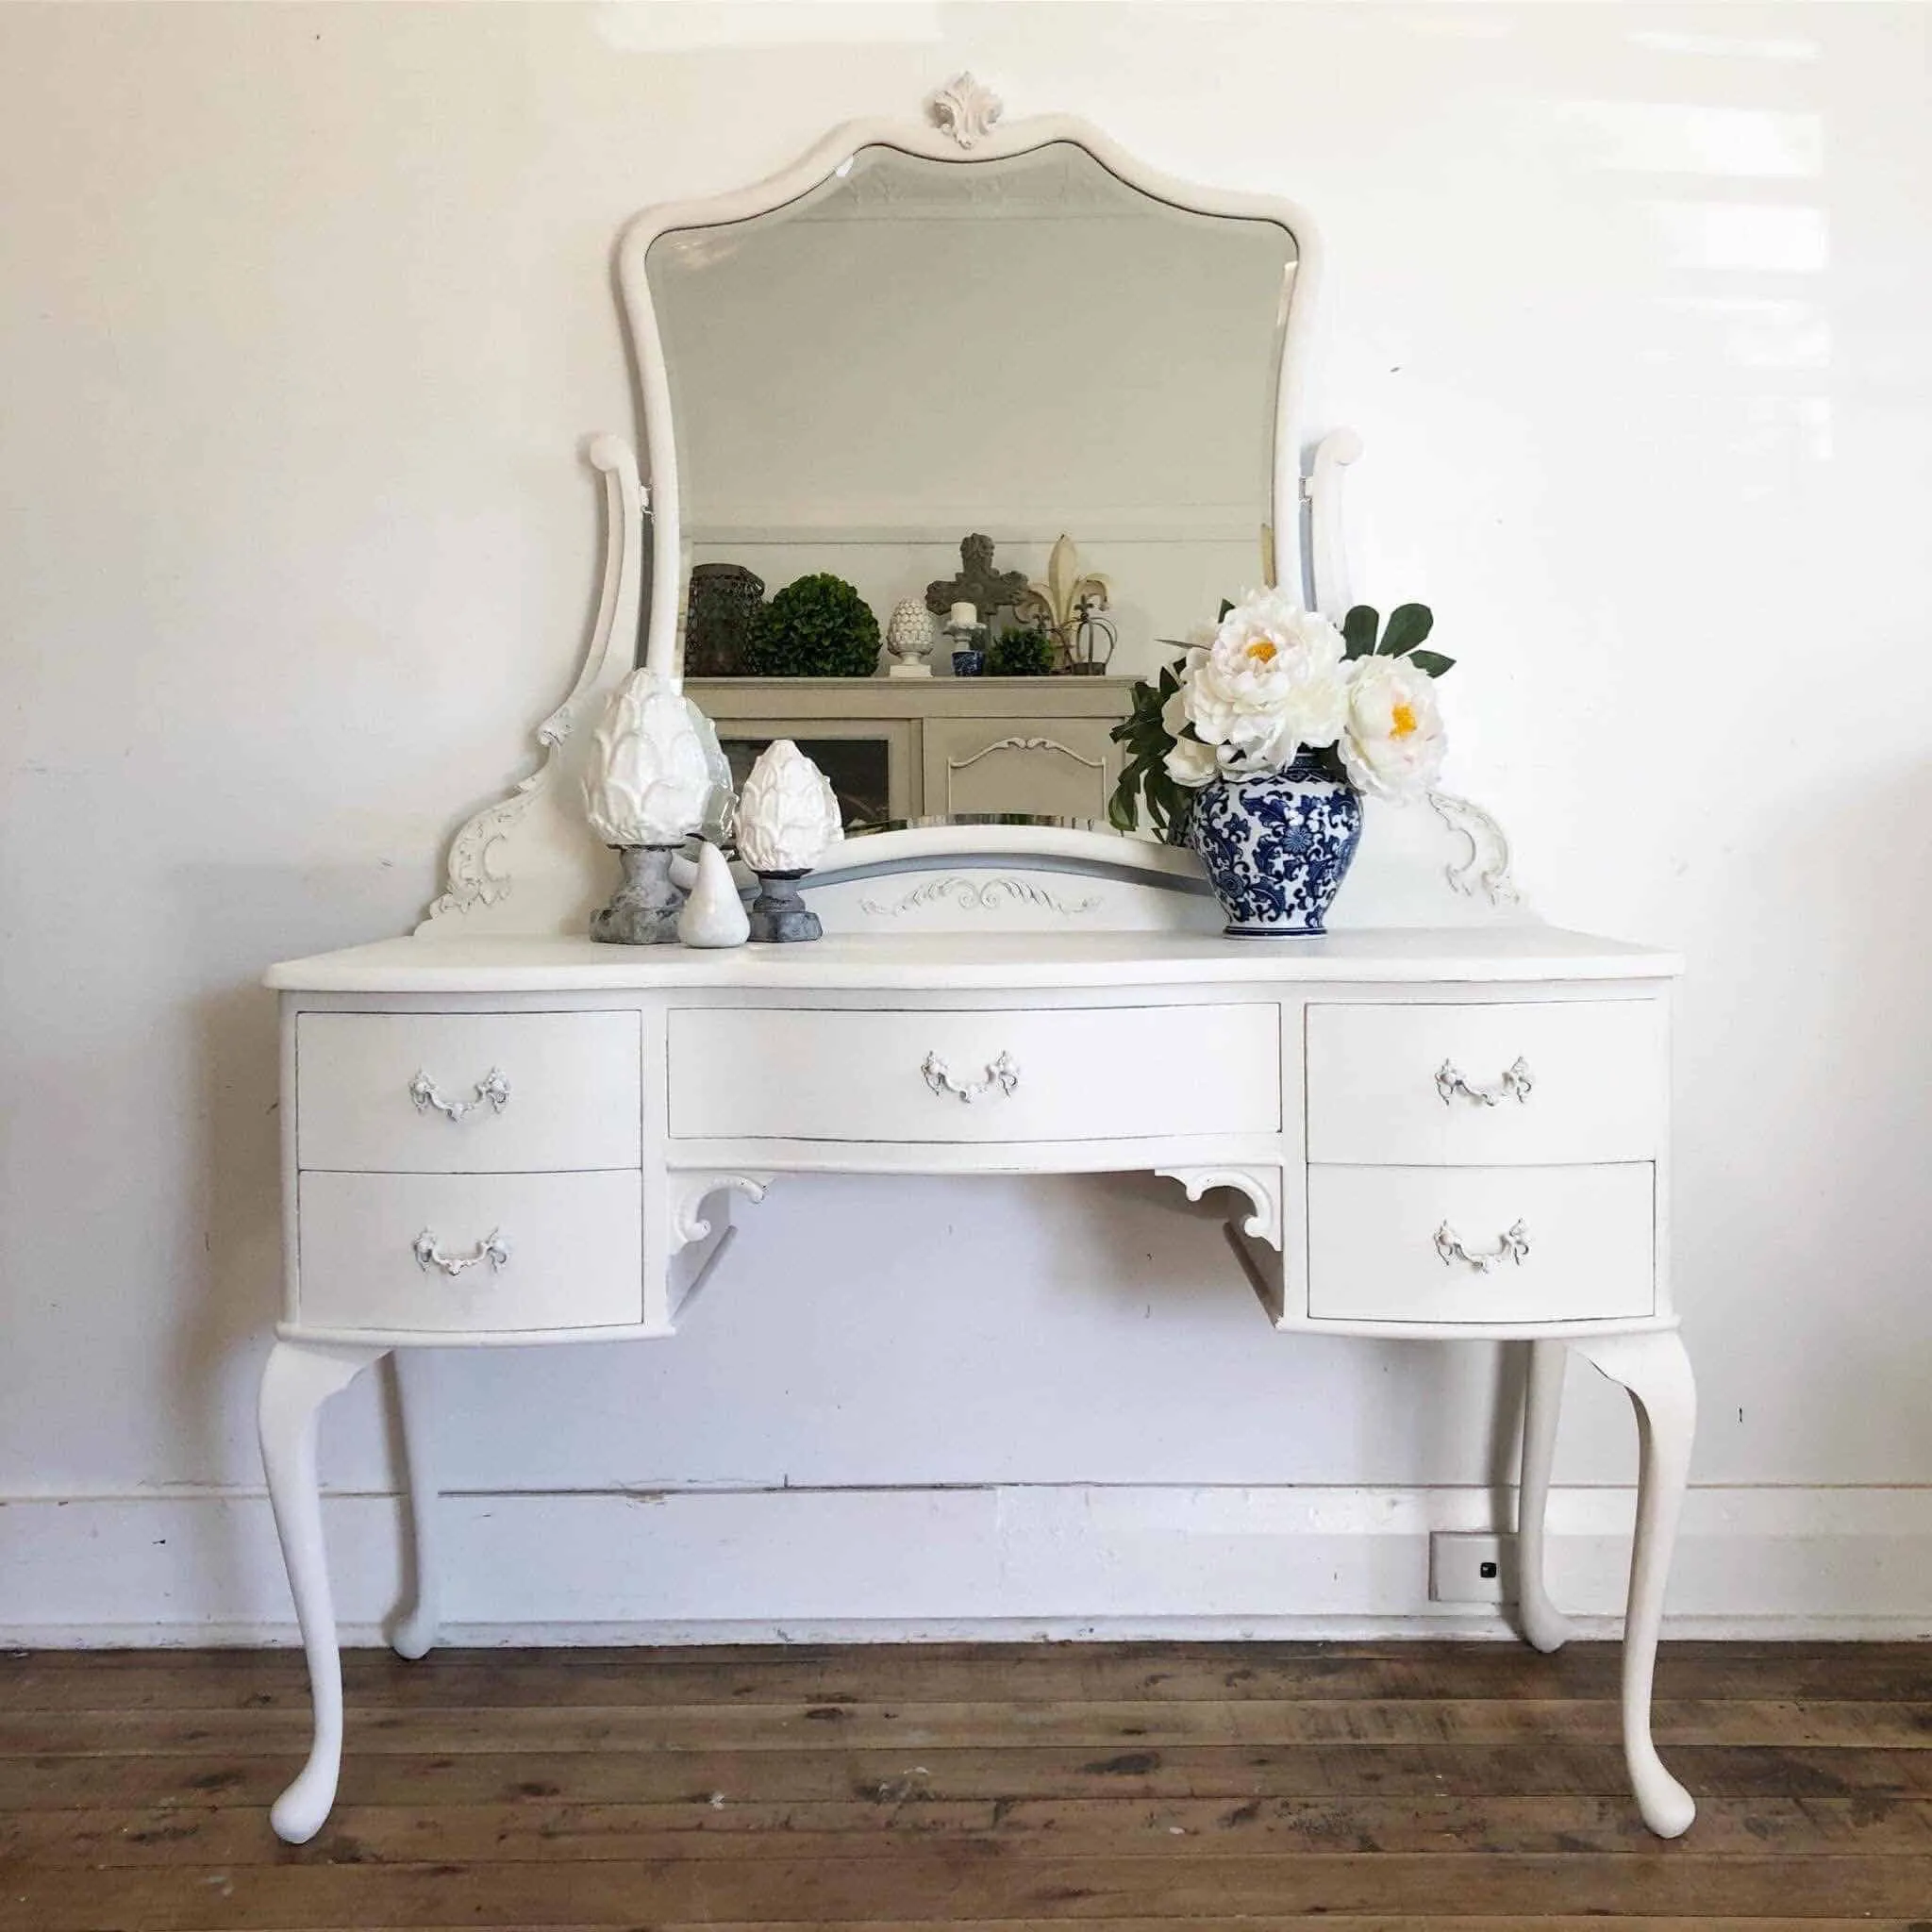 A classic white-colored vanity design with an irregular-shaped mirror and good storage space, kept in a white-colored room.